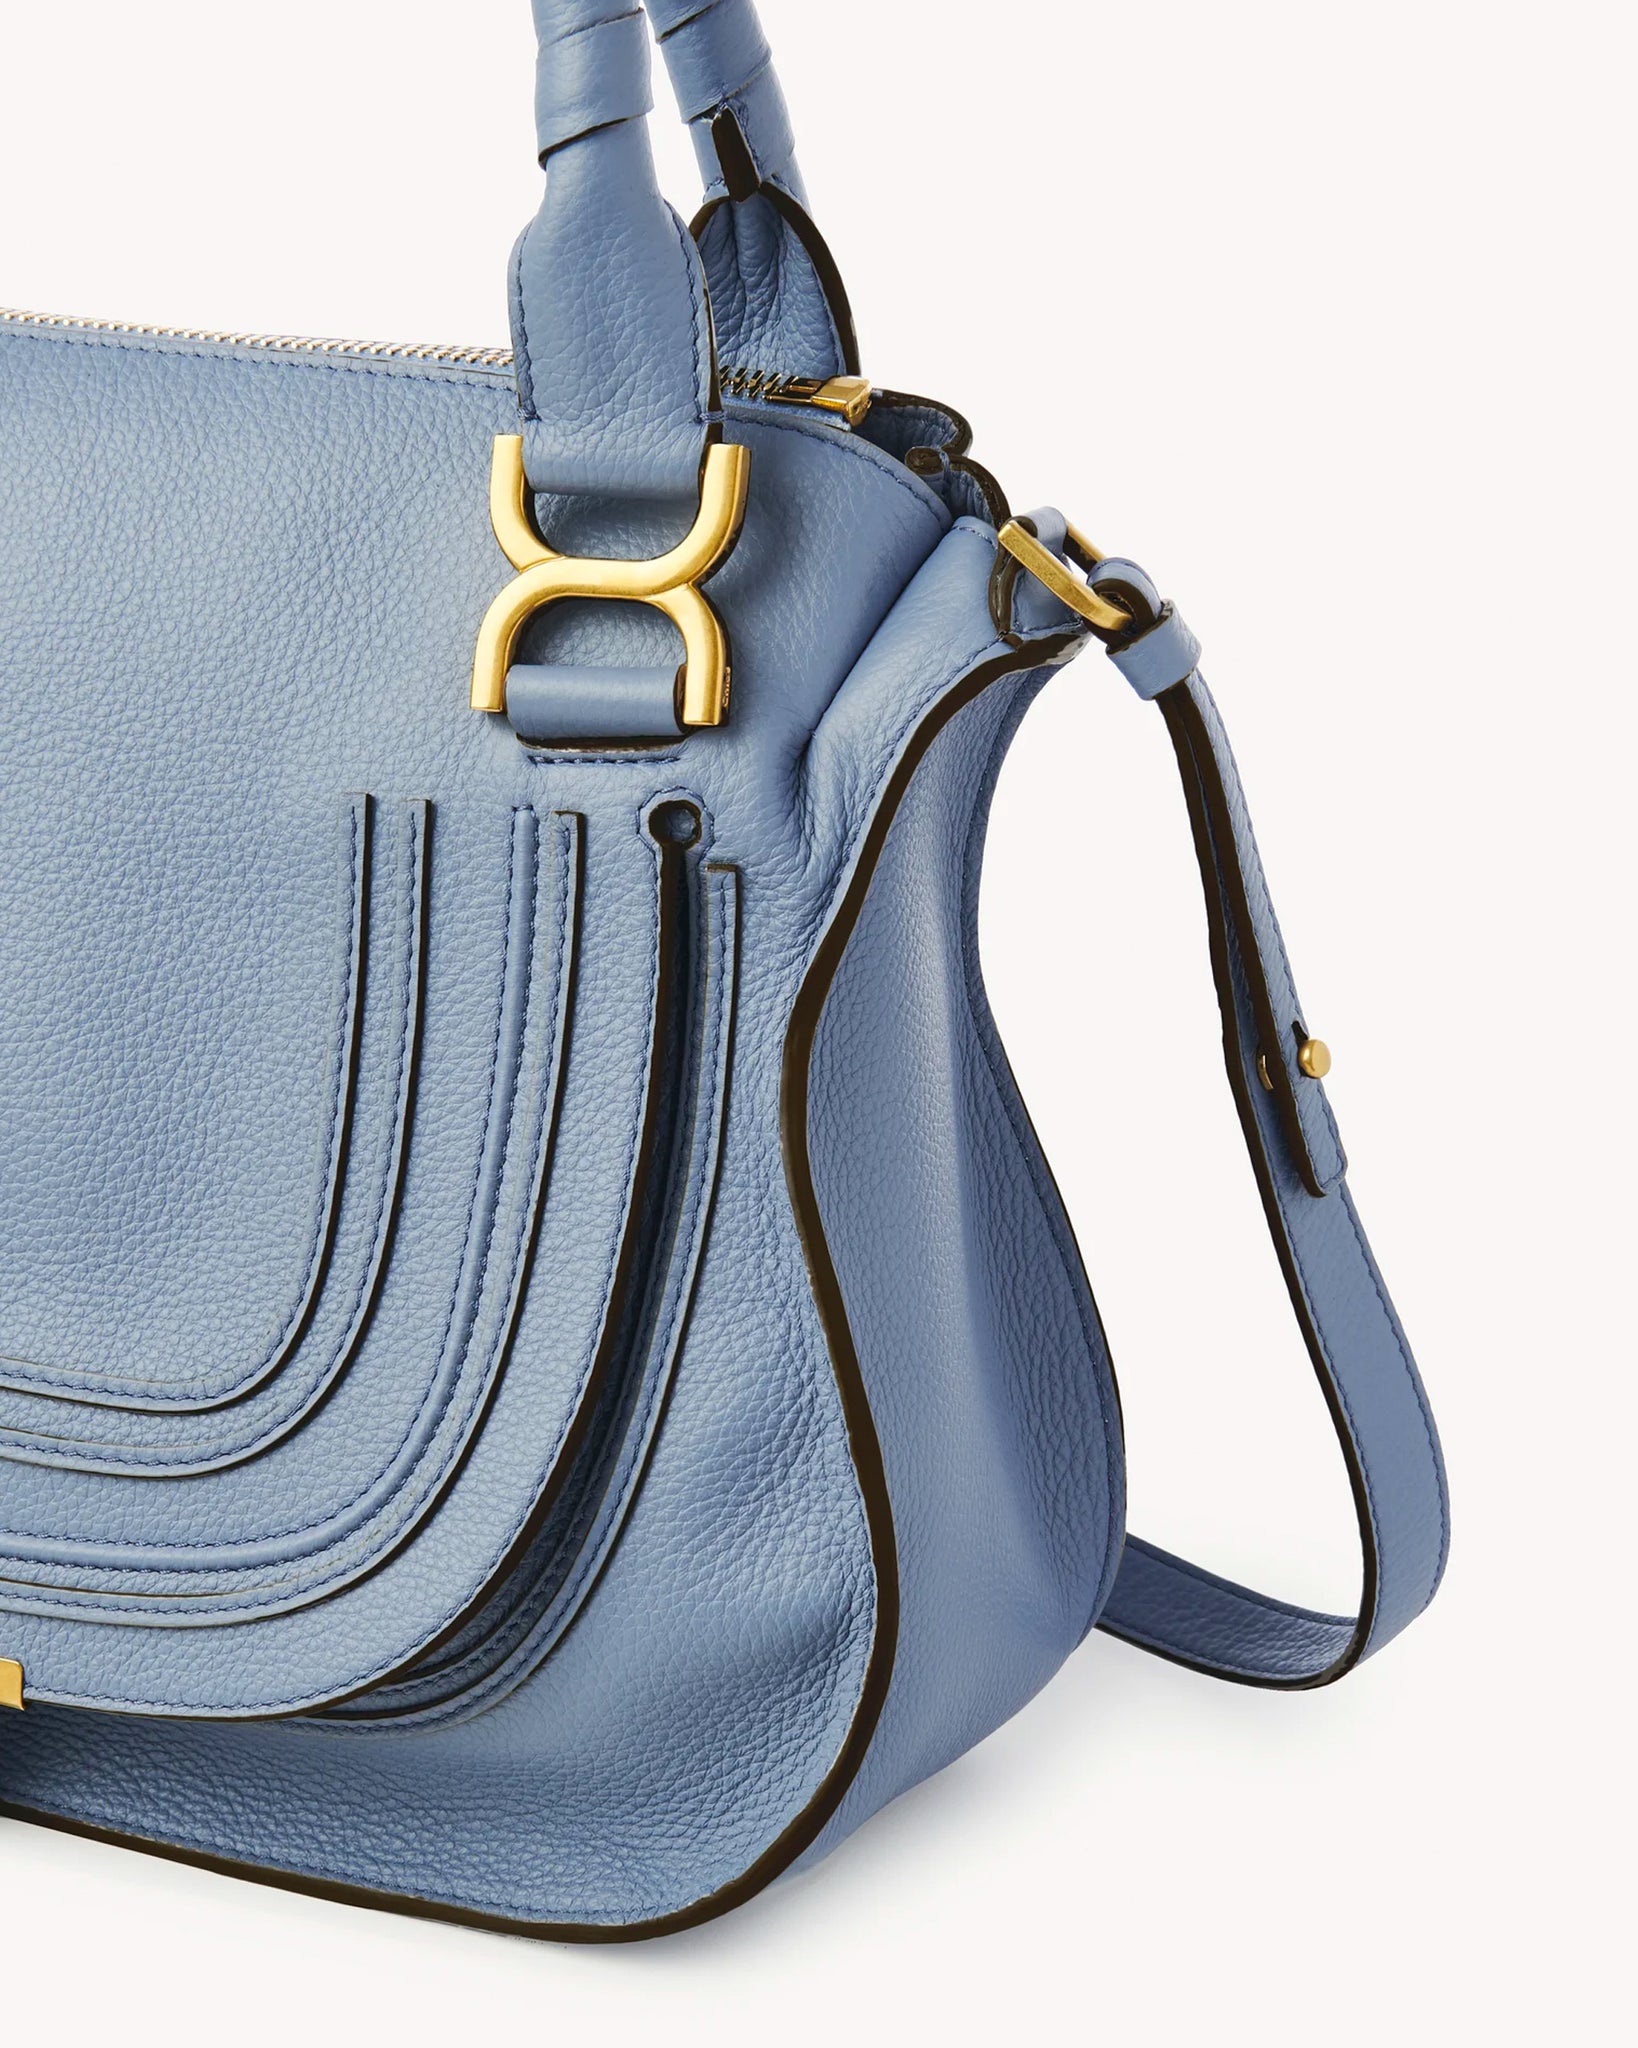 Marcie Small Double Carry Satchel in Shady Cobalt